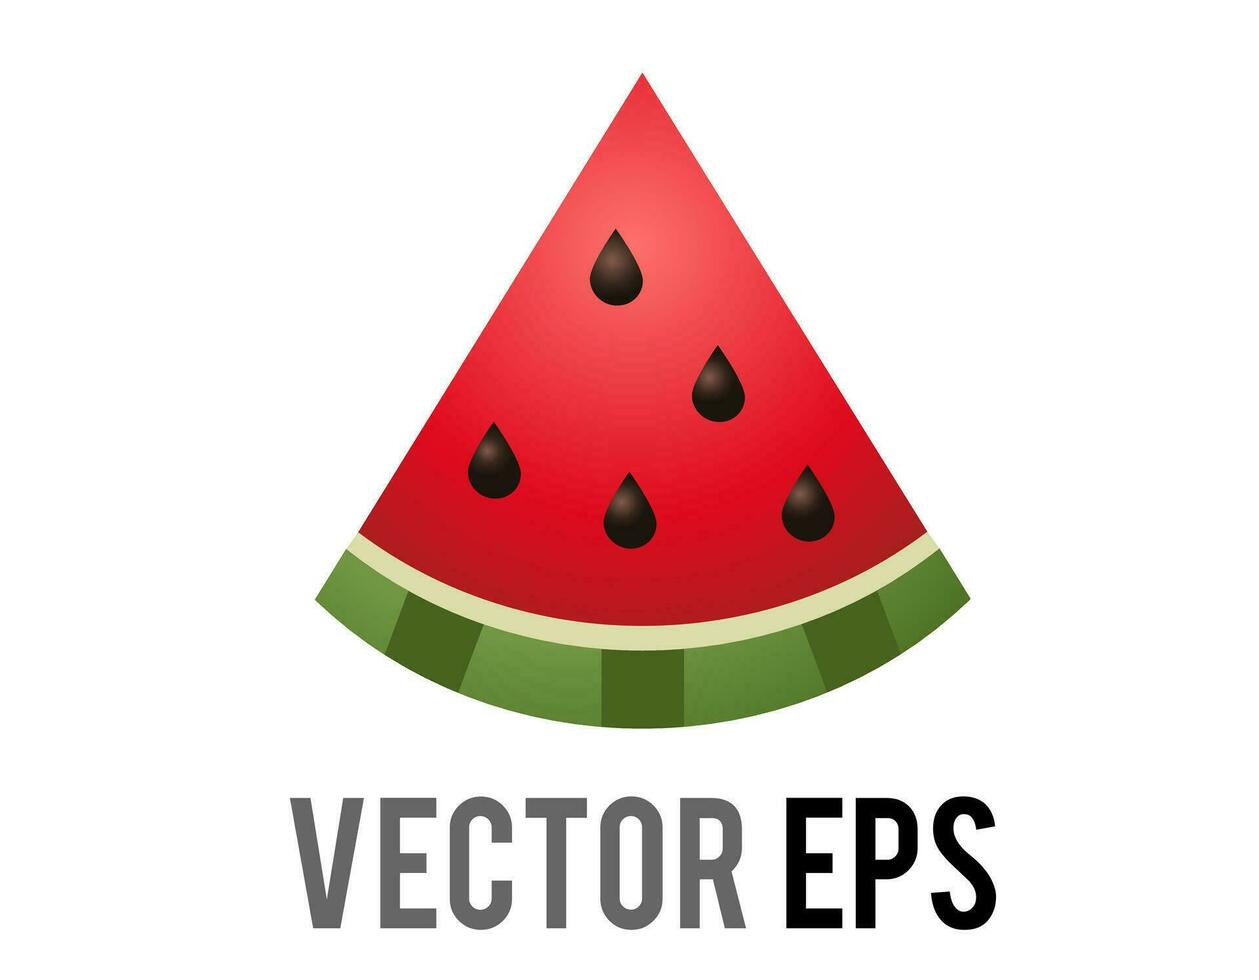 Slice of vector red watermelon icon, showing red pink flesh, black seeds and green rind